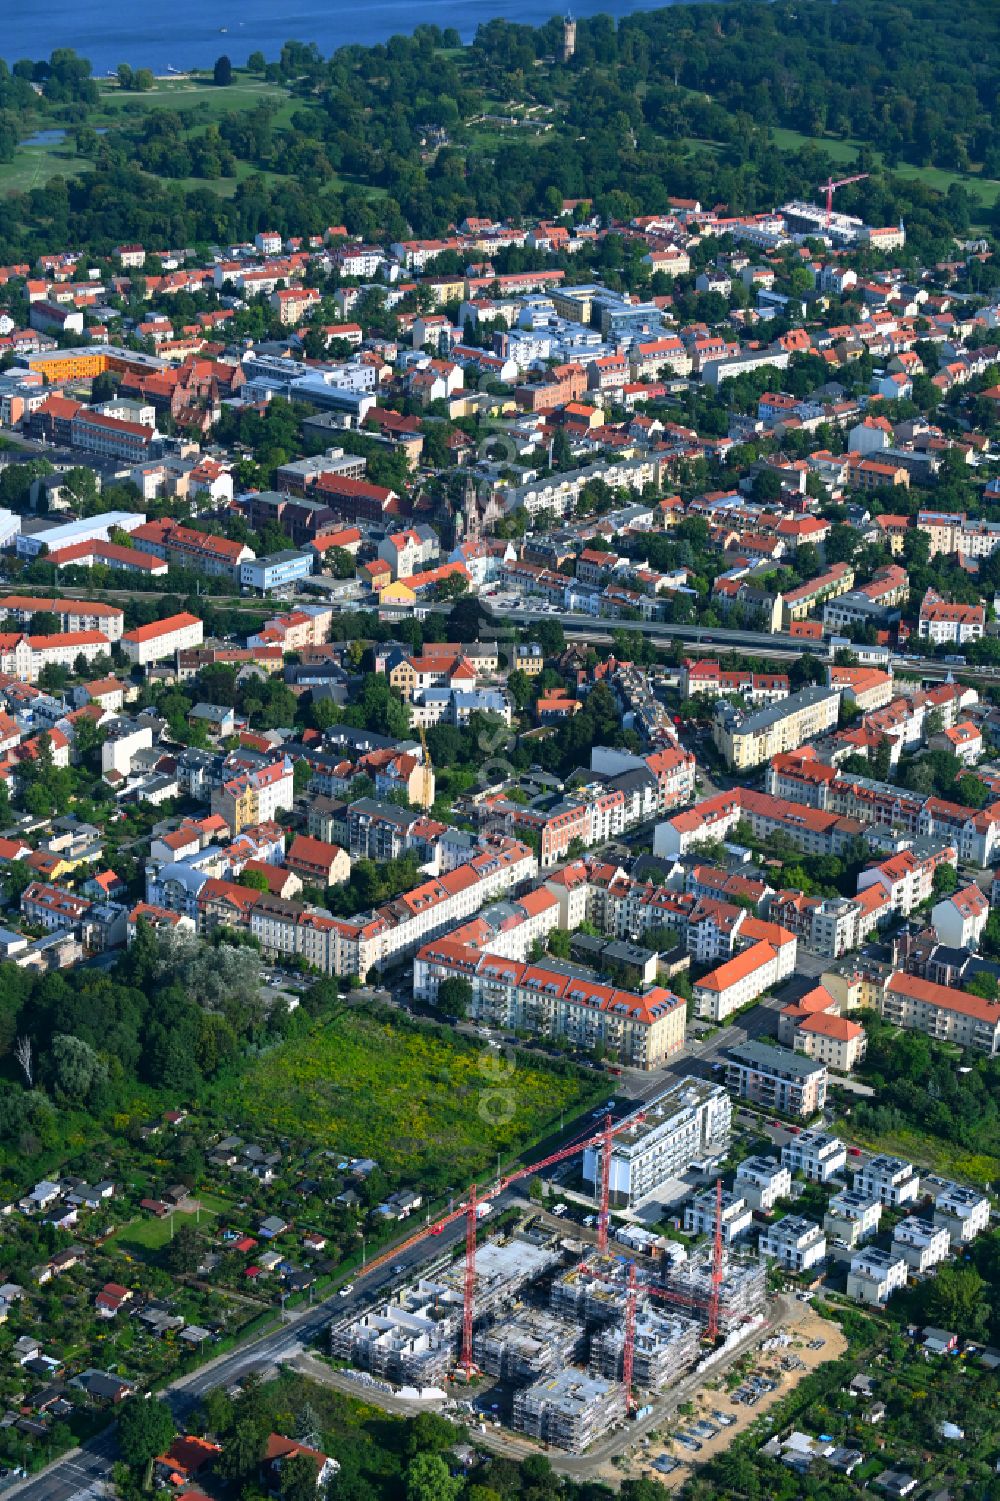 Aerial photograph Potsdam - Residential construction site with multi-family housing development- of the project Residenz Babelsberg Sued on Horstweg in the district Babelsberg Sued in Potsdam in the state Brandenburg, Germany